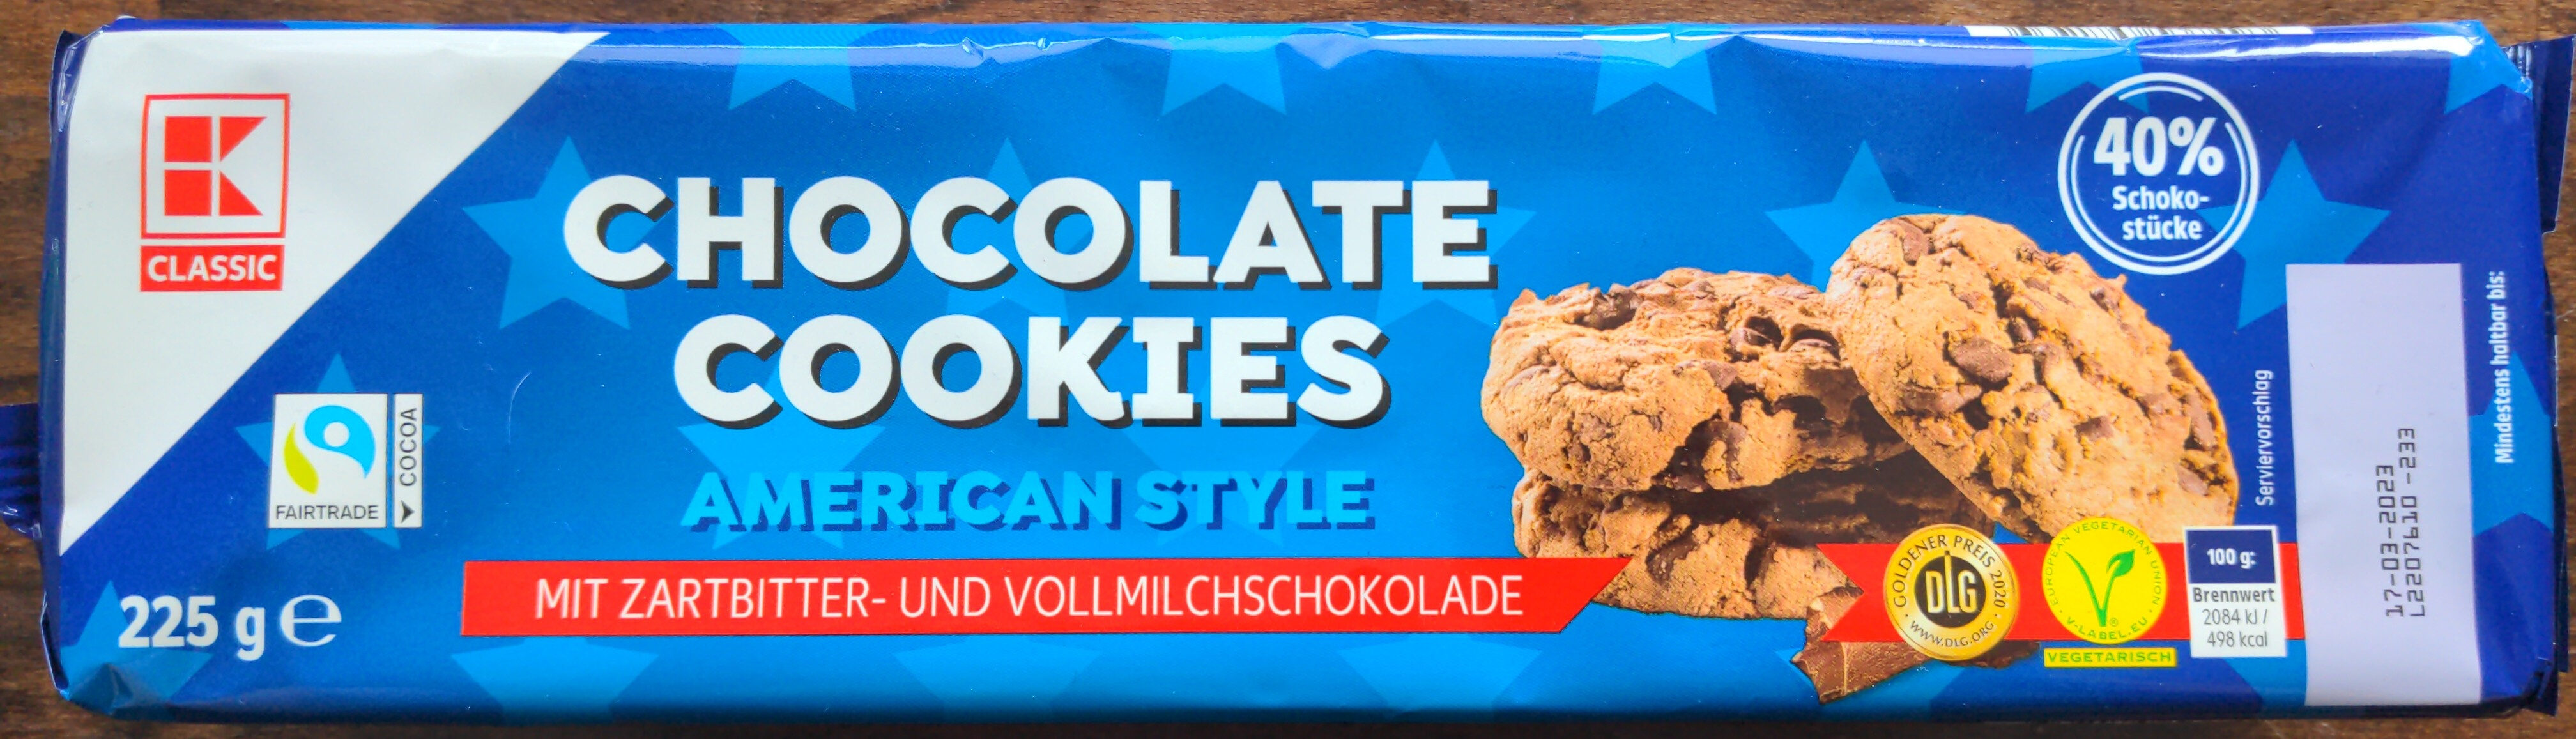 Chocolate Cookies American Style - Product - de